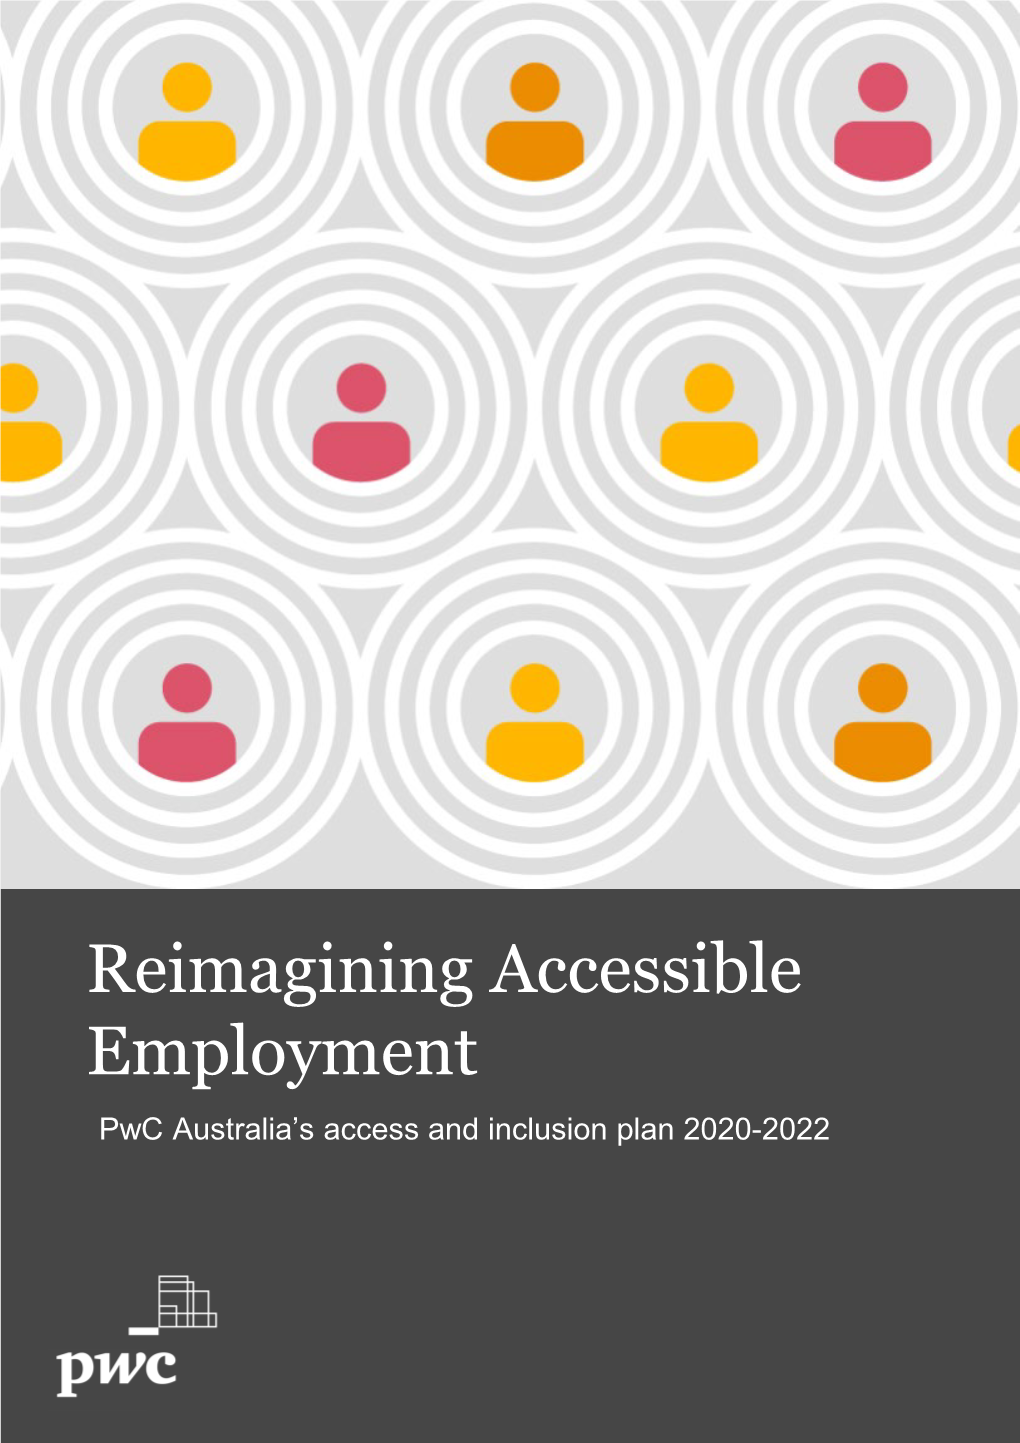 Reimagining Accessible Employment Pwc Australia’S Access and Inclusion Plan 2020-2022